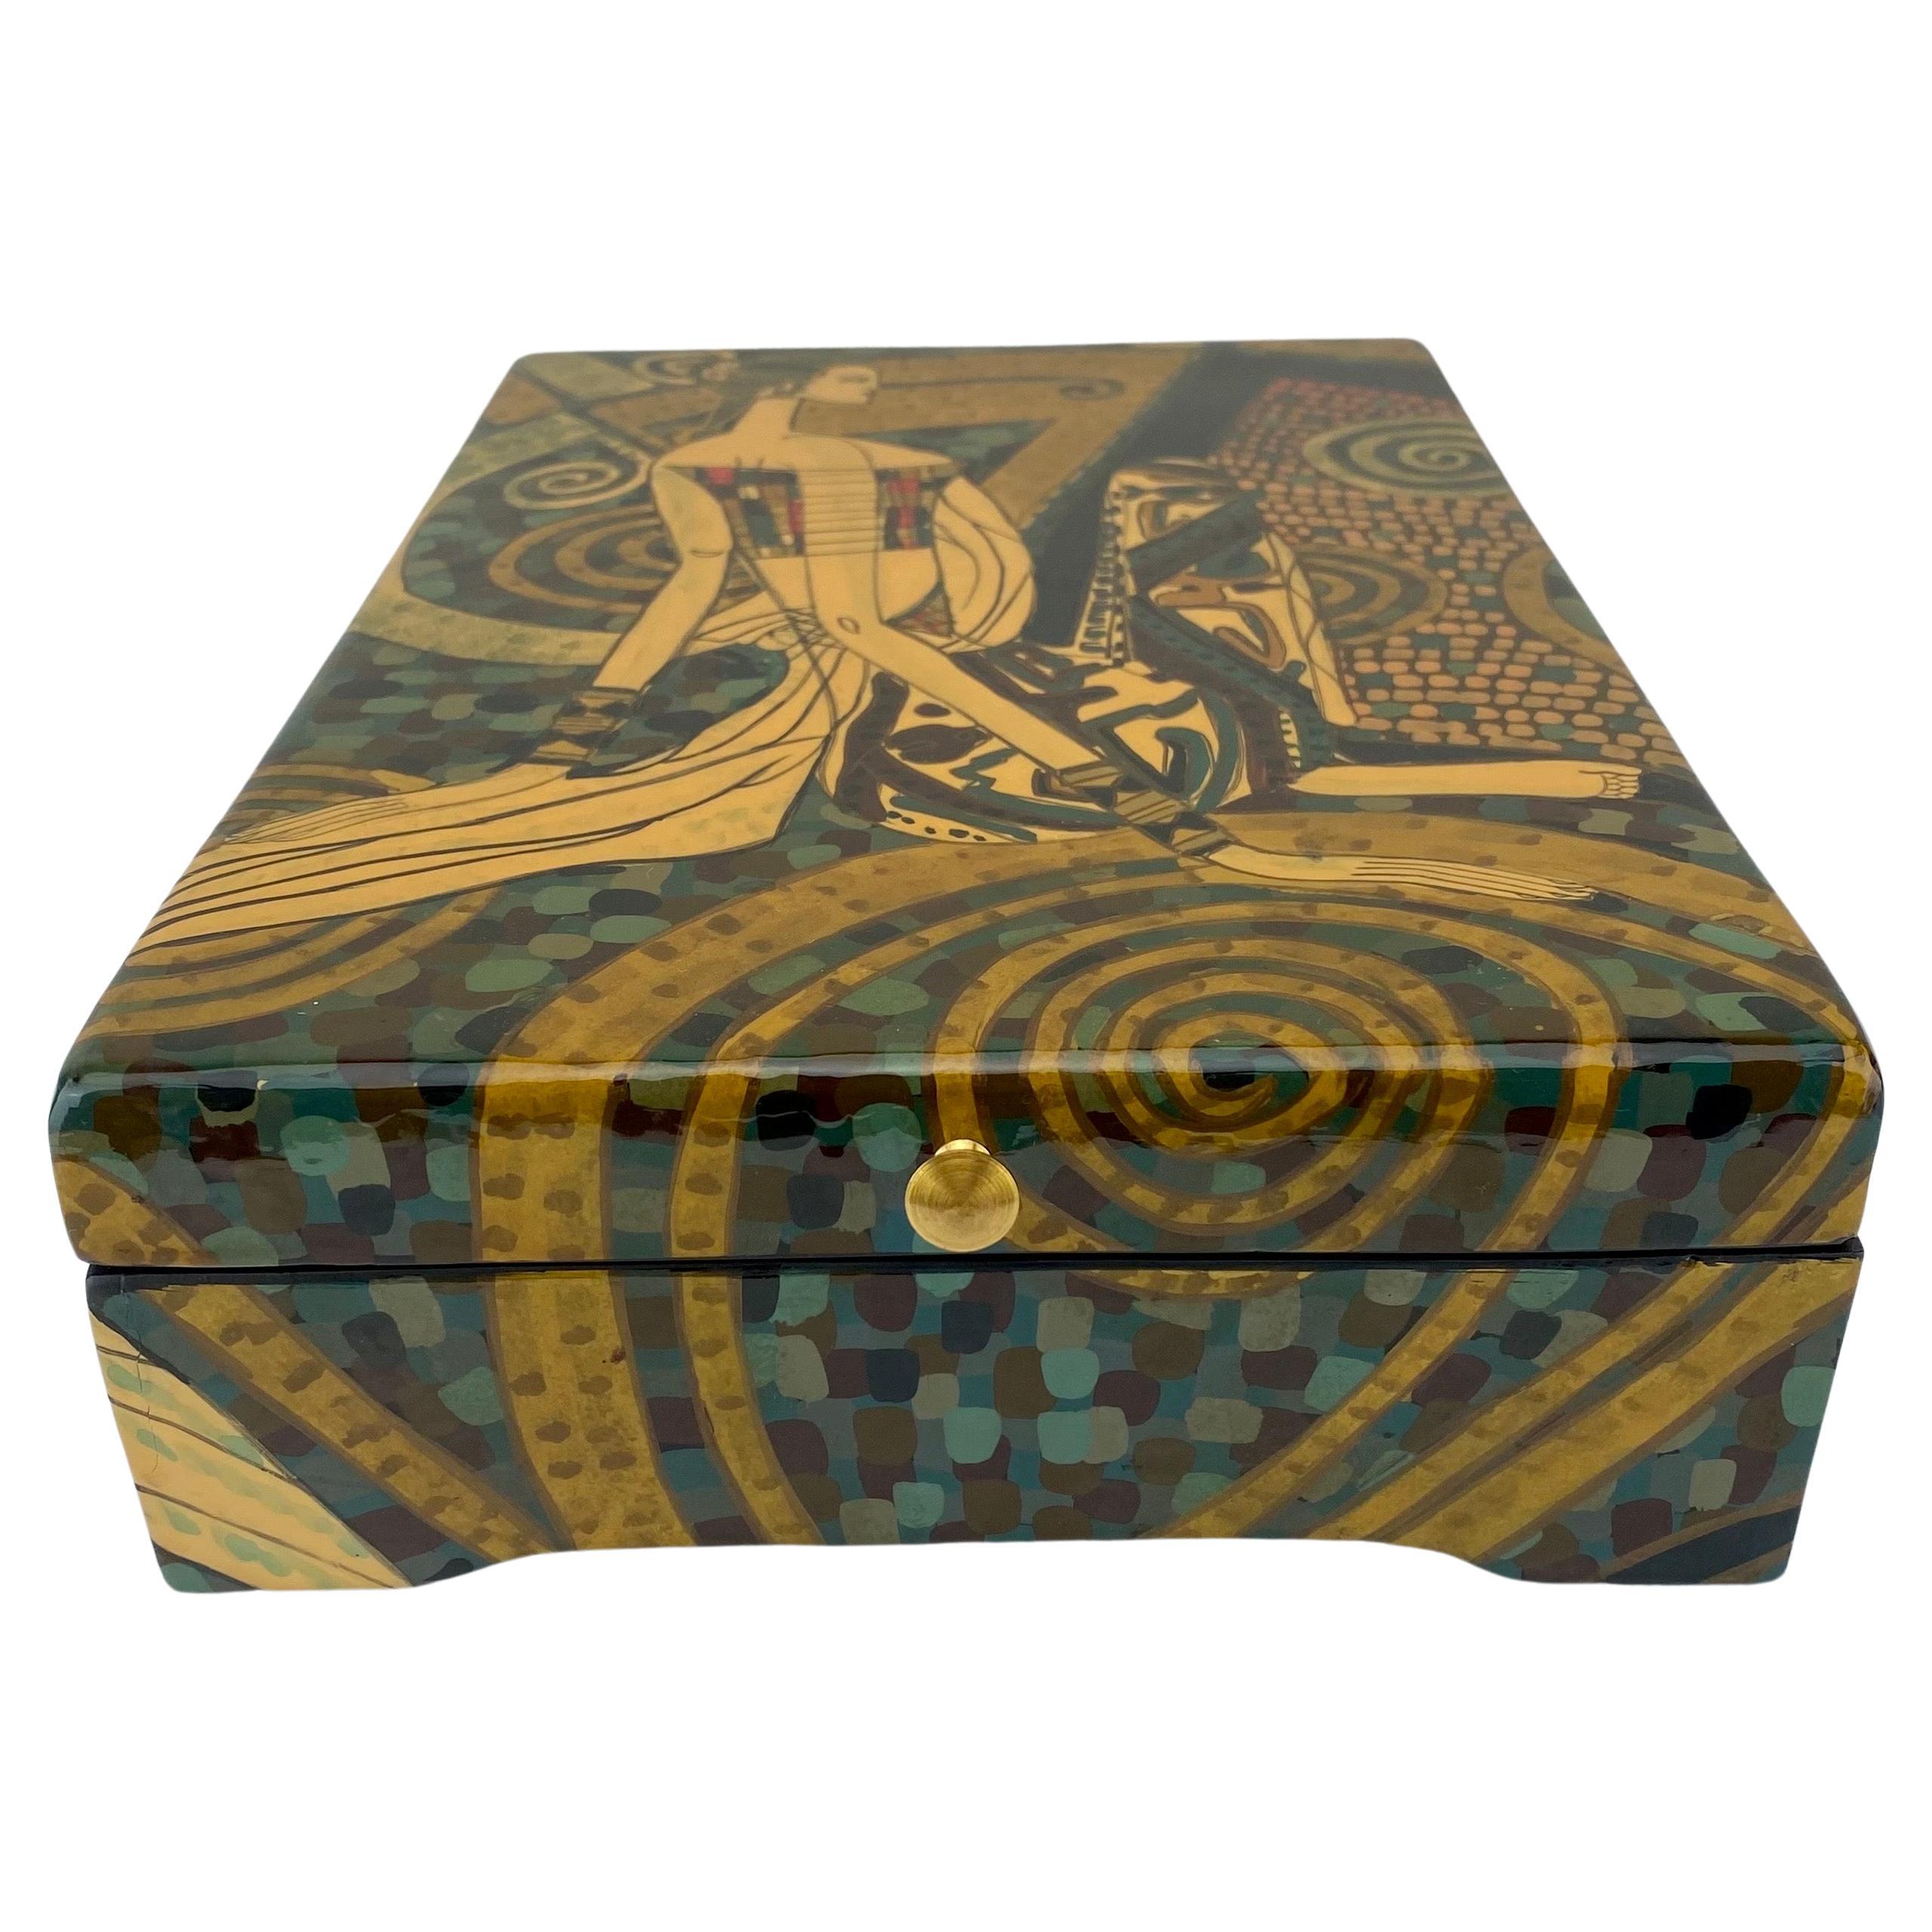  An exquisite Art Deco Revival style decorative storage or jewelry box. This unique piece showcases a figural representation of a woman standing beside a man, where the woman, in a dominant stance, captures attention with her larger-than-life